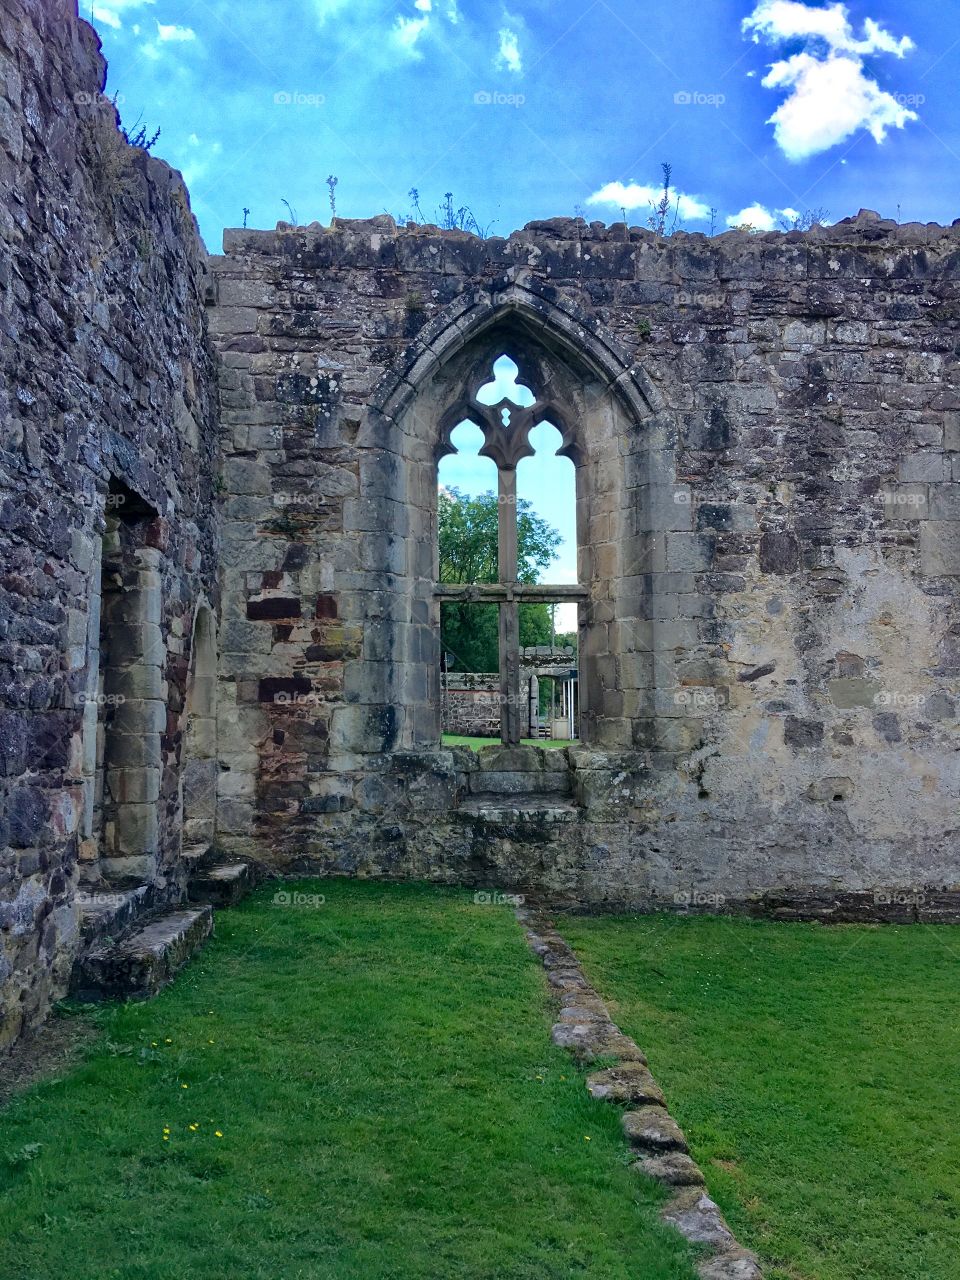 Ruined archway